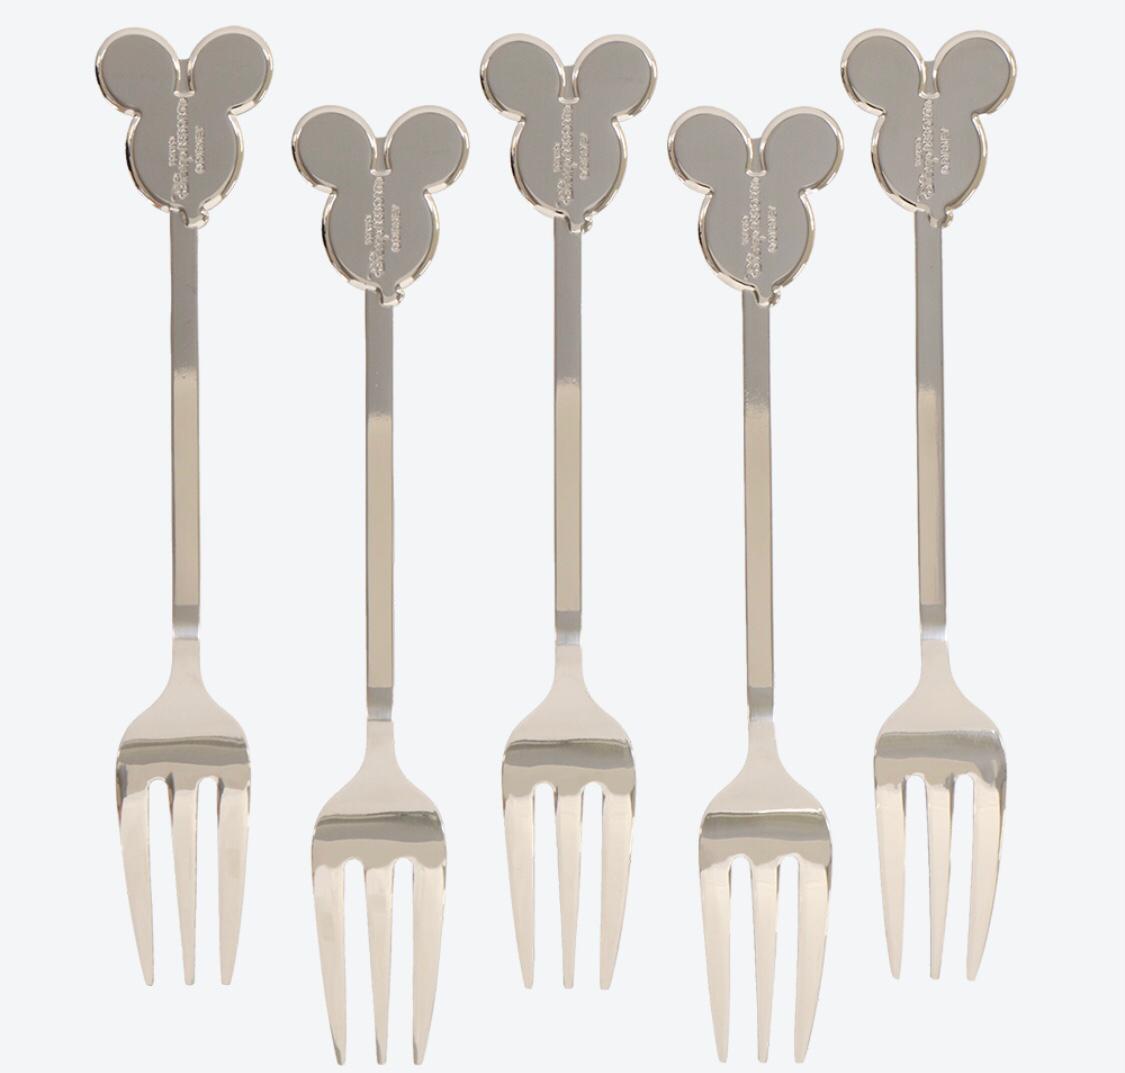 TDR - Happiness in the Sky - Fork set